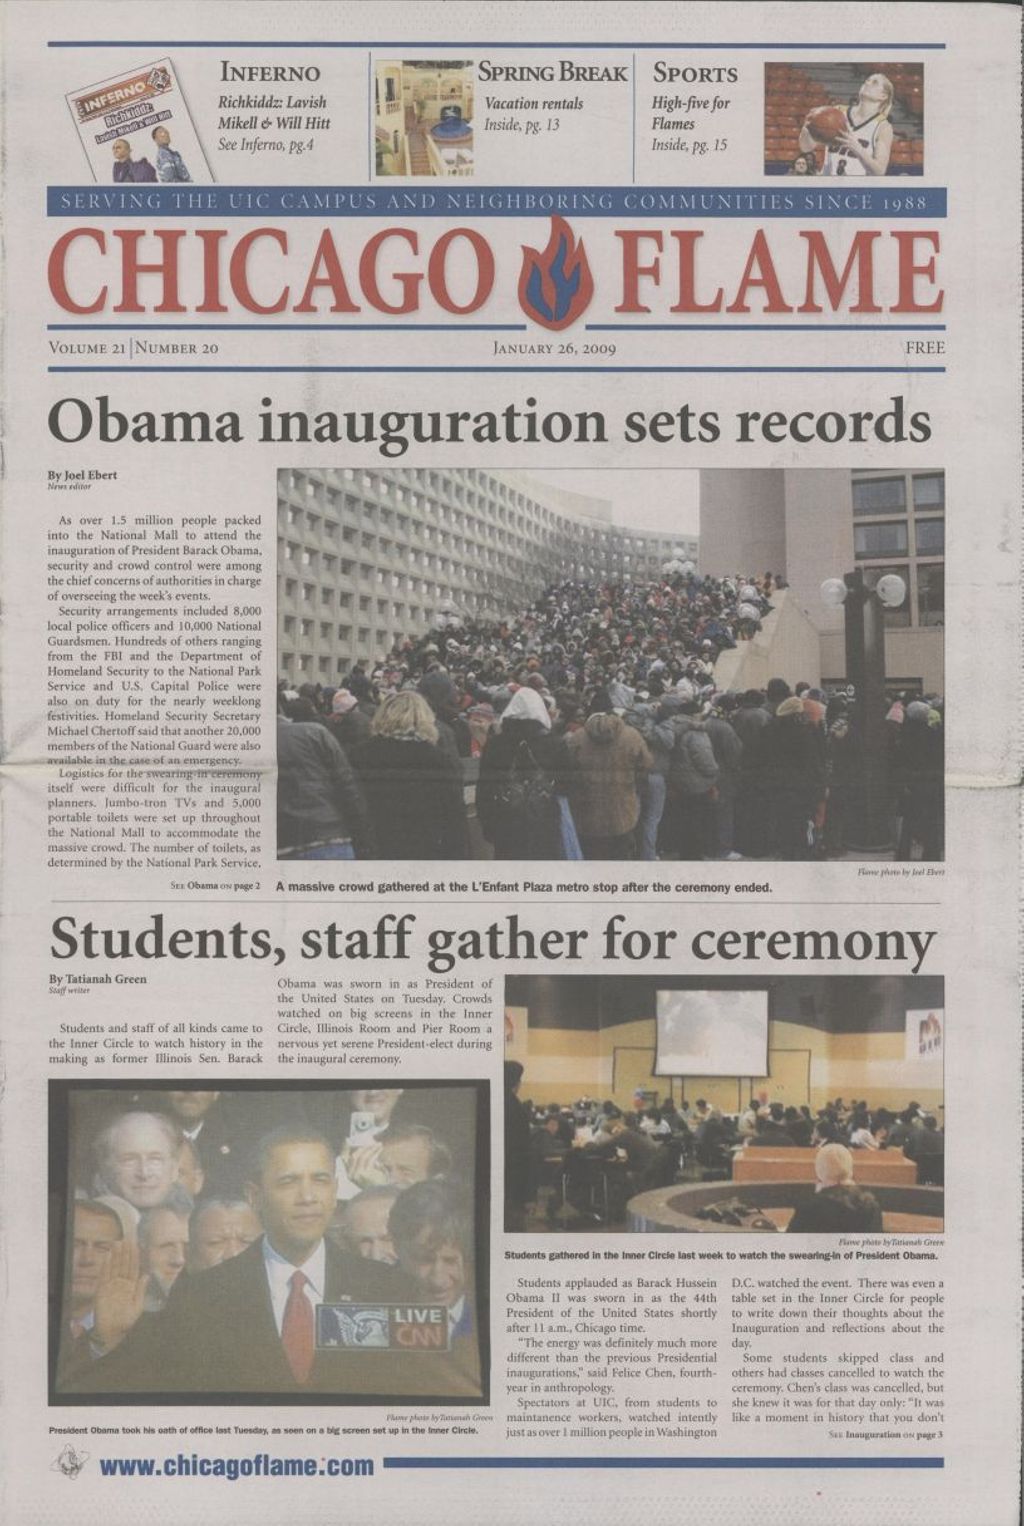 Chicago Flame (January 26, 2009)